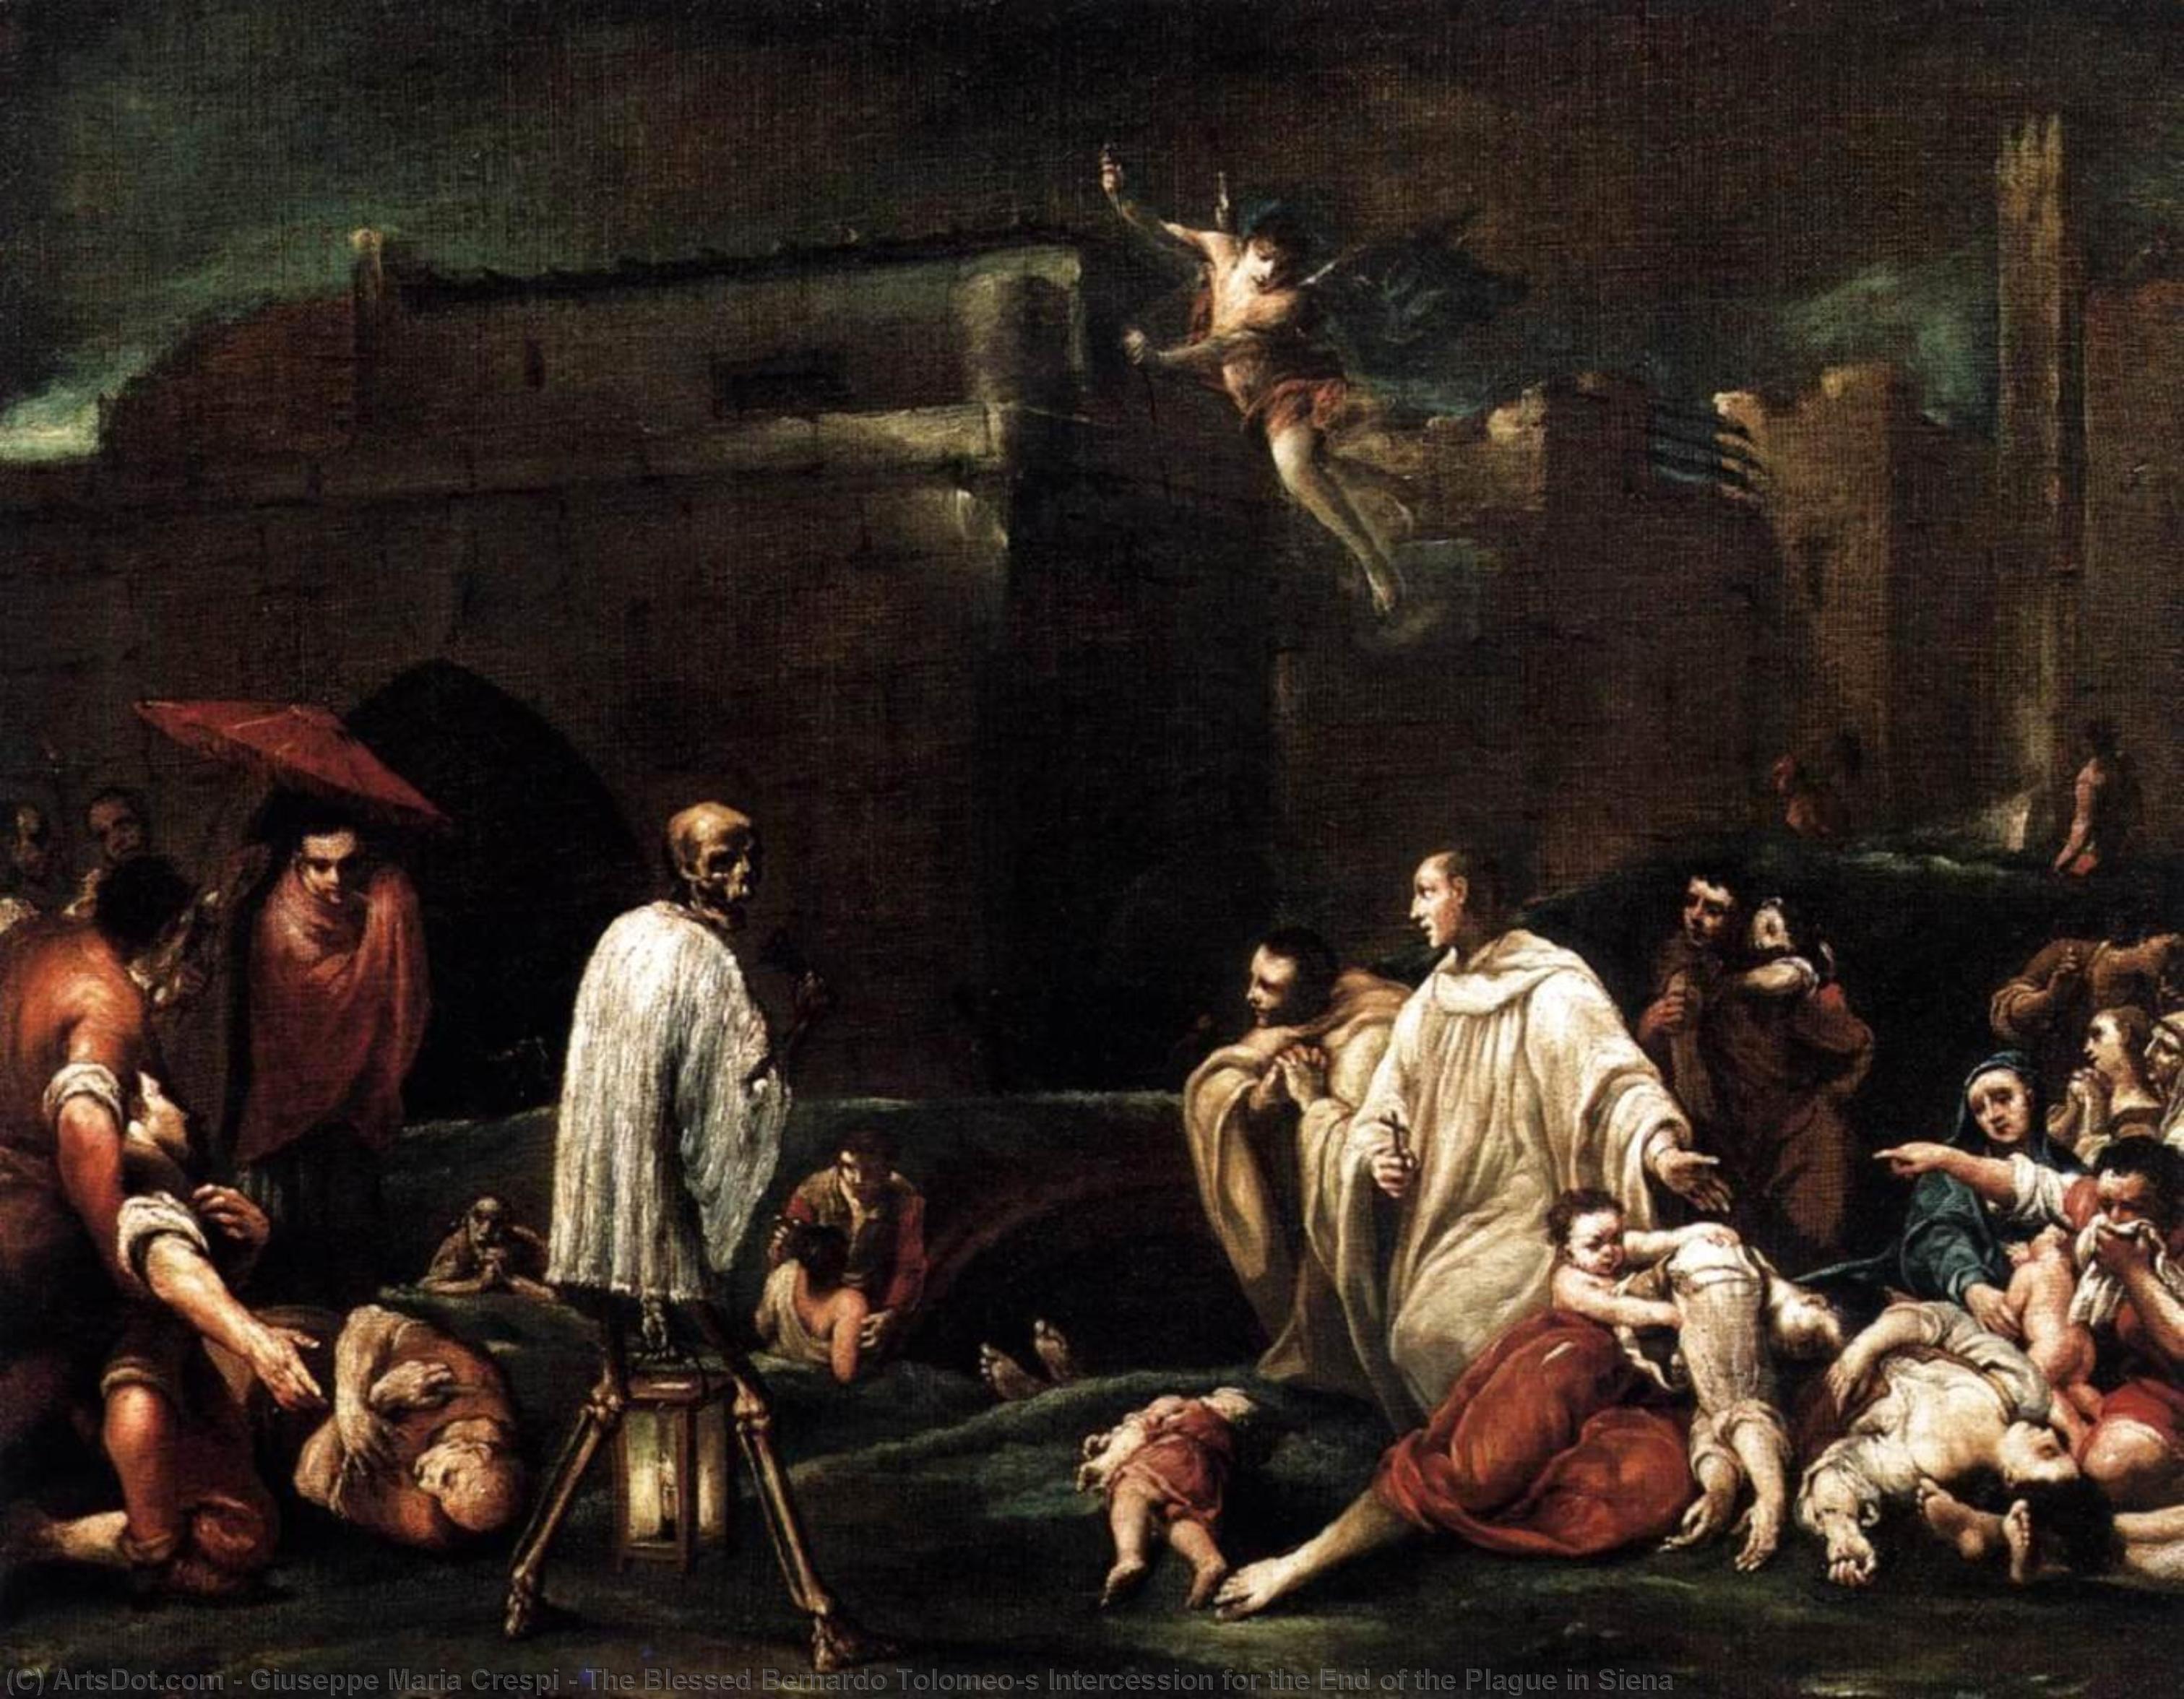 Order Art Reproductions The Blessed Bernardo Tolomeo`s Intercession for the End of the Plague in Siena, 1735 by Giuseppe Maria Crespi (1665-1747, Italy) | ArtsDot.com